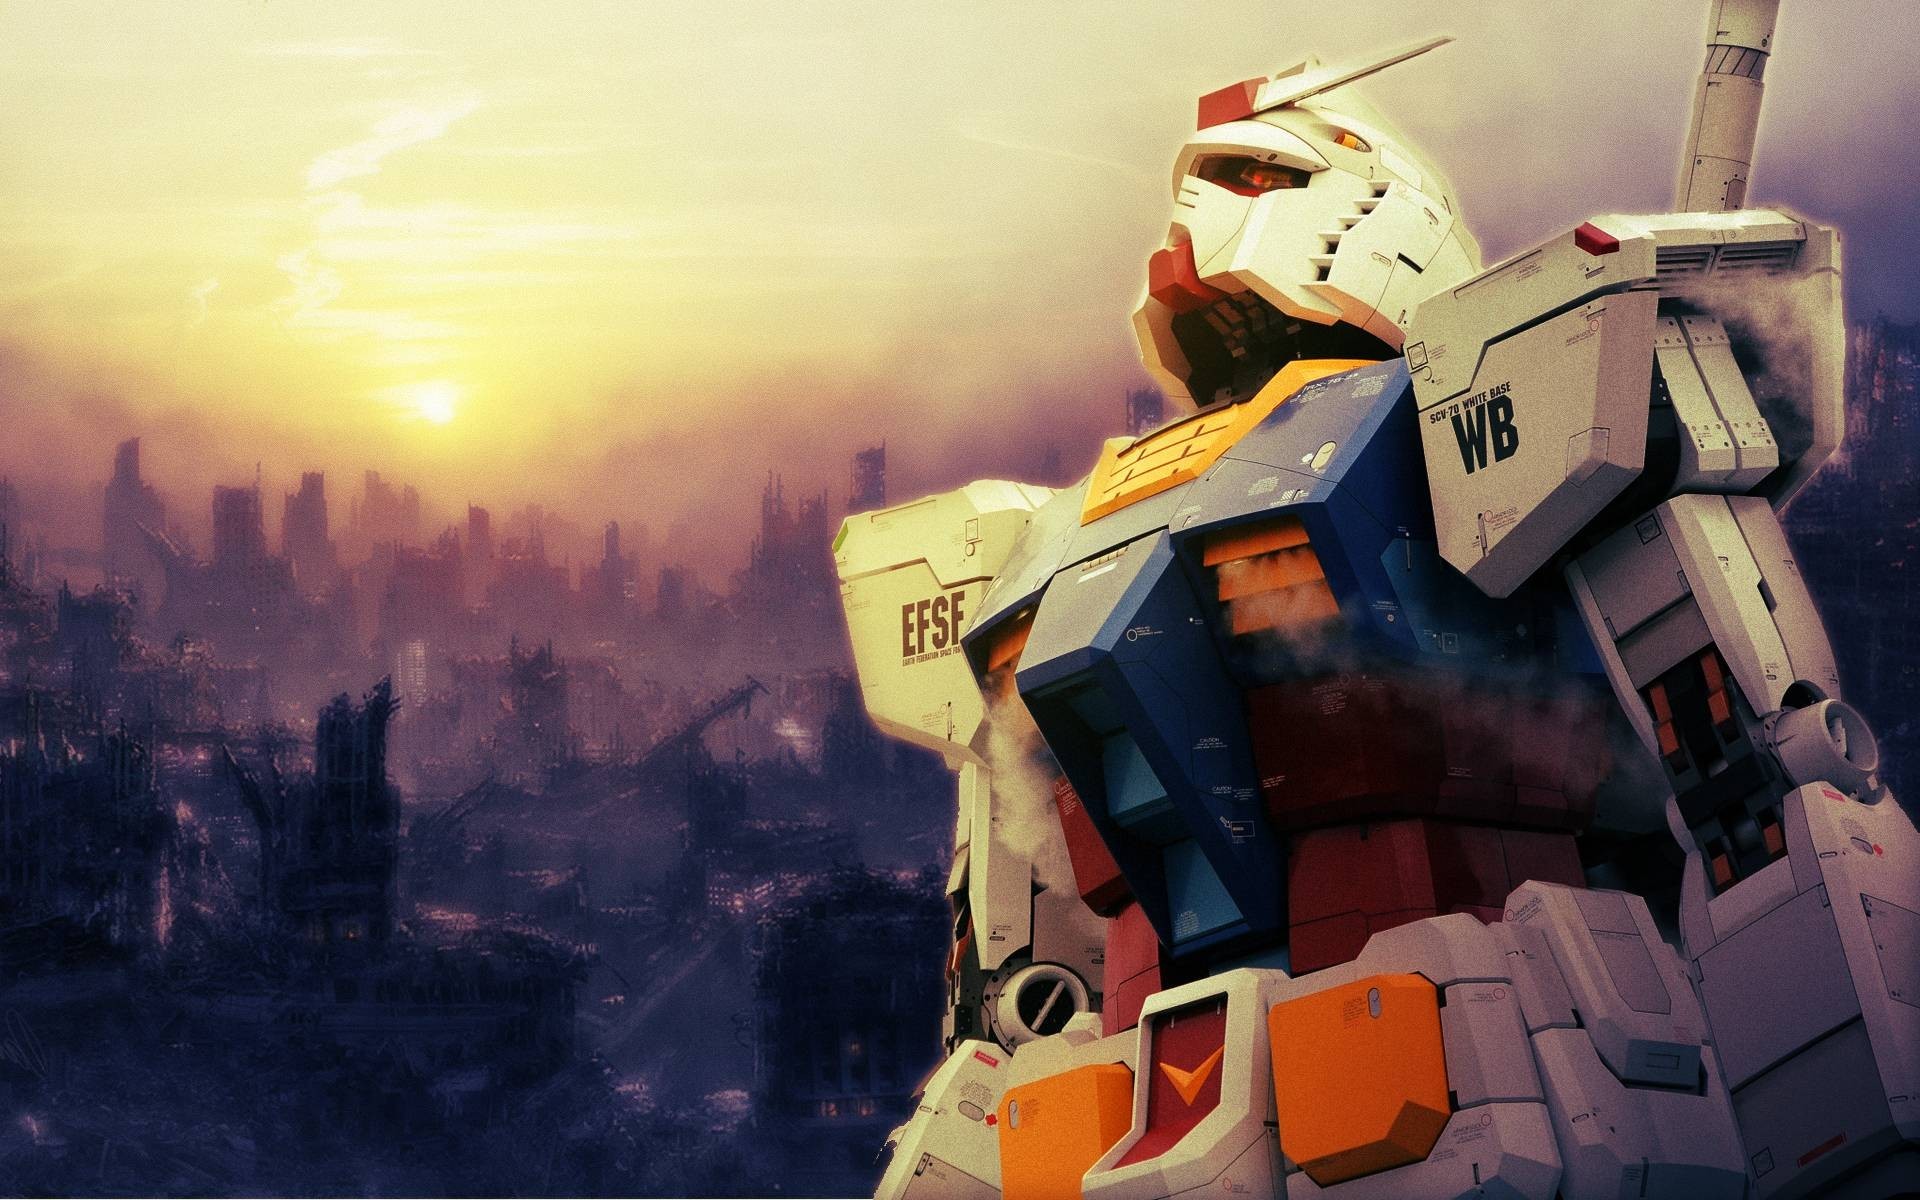 Three New Mobile Suit Gundam Anime Projects Announced